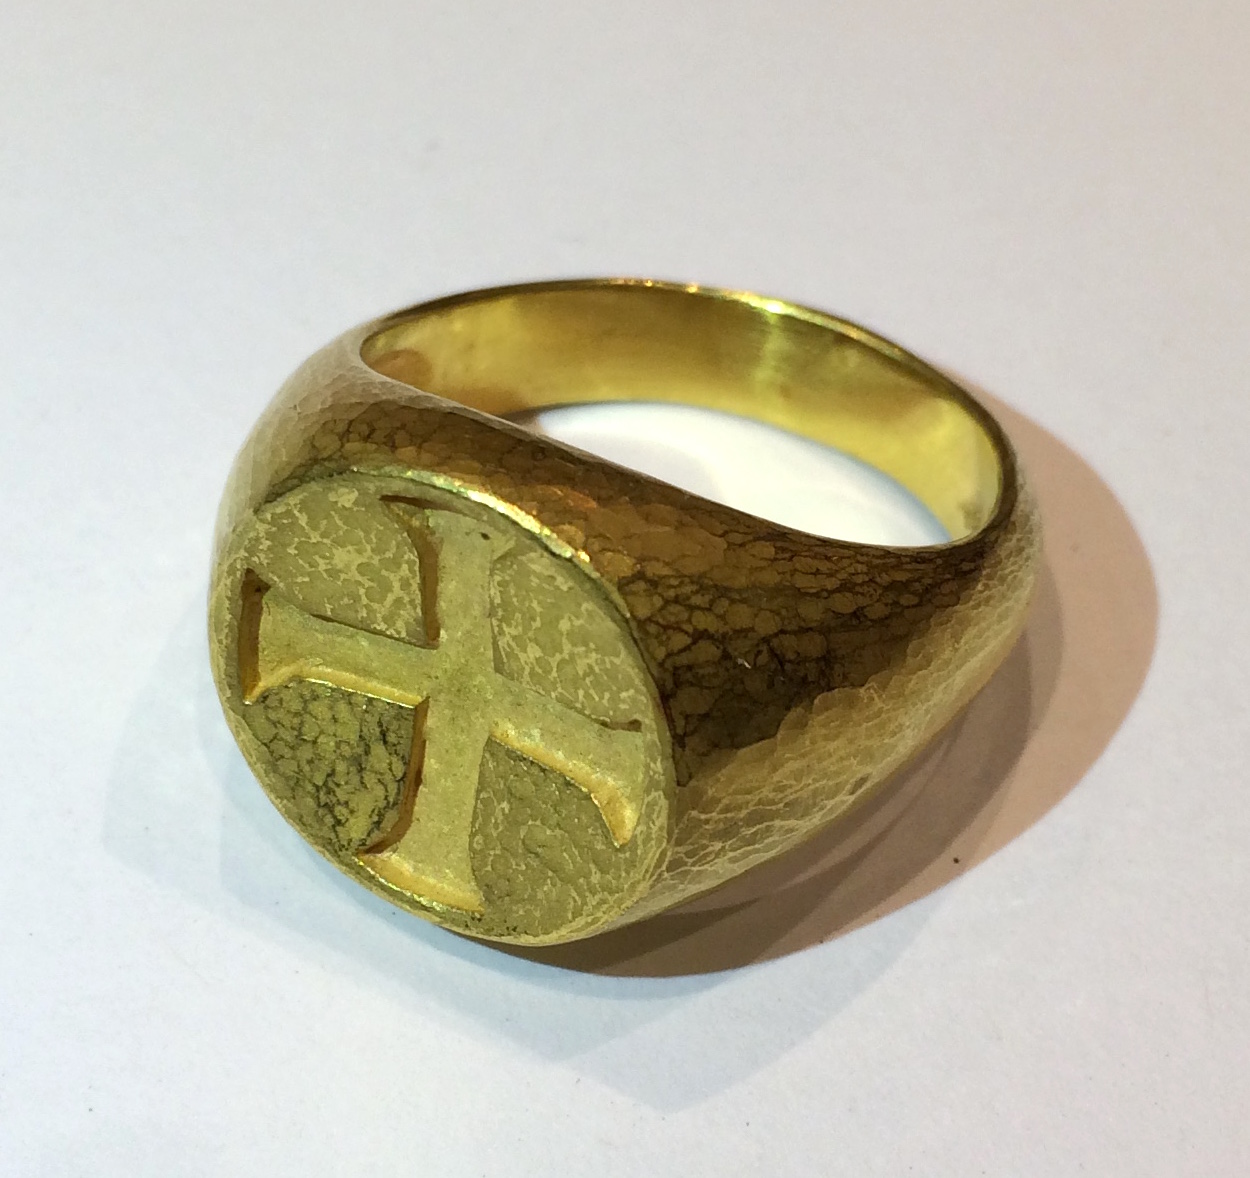 Ancient cross ring, finely hammered 20K gold, marked, c. 2000